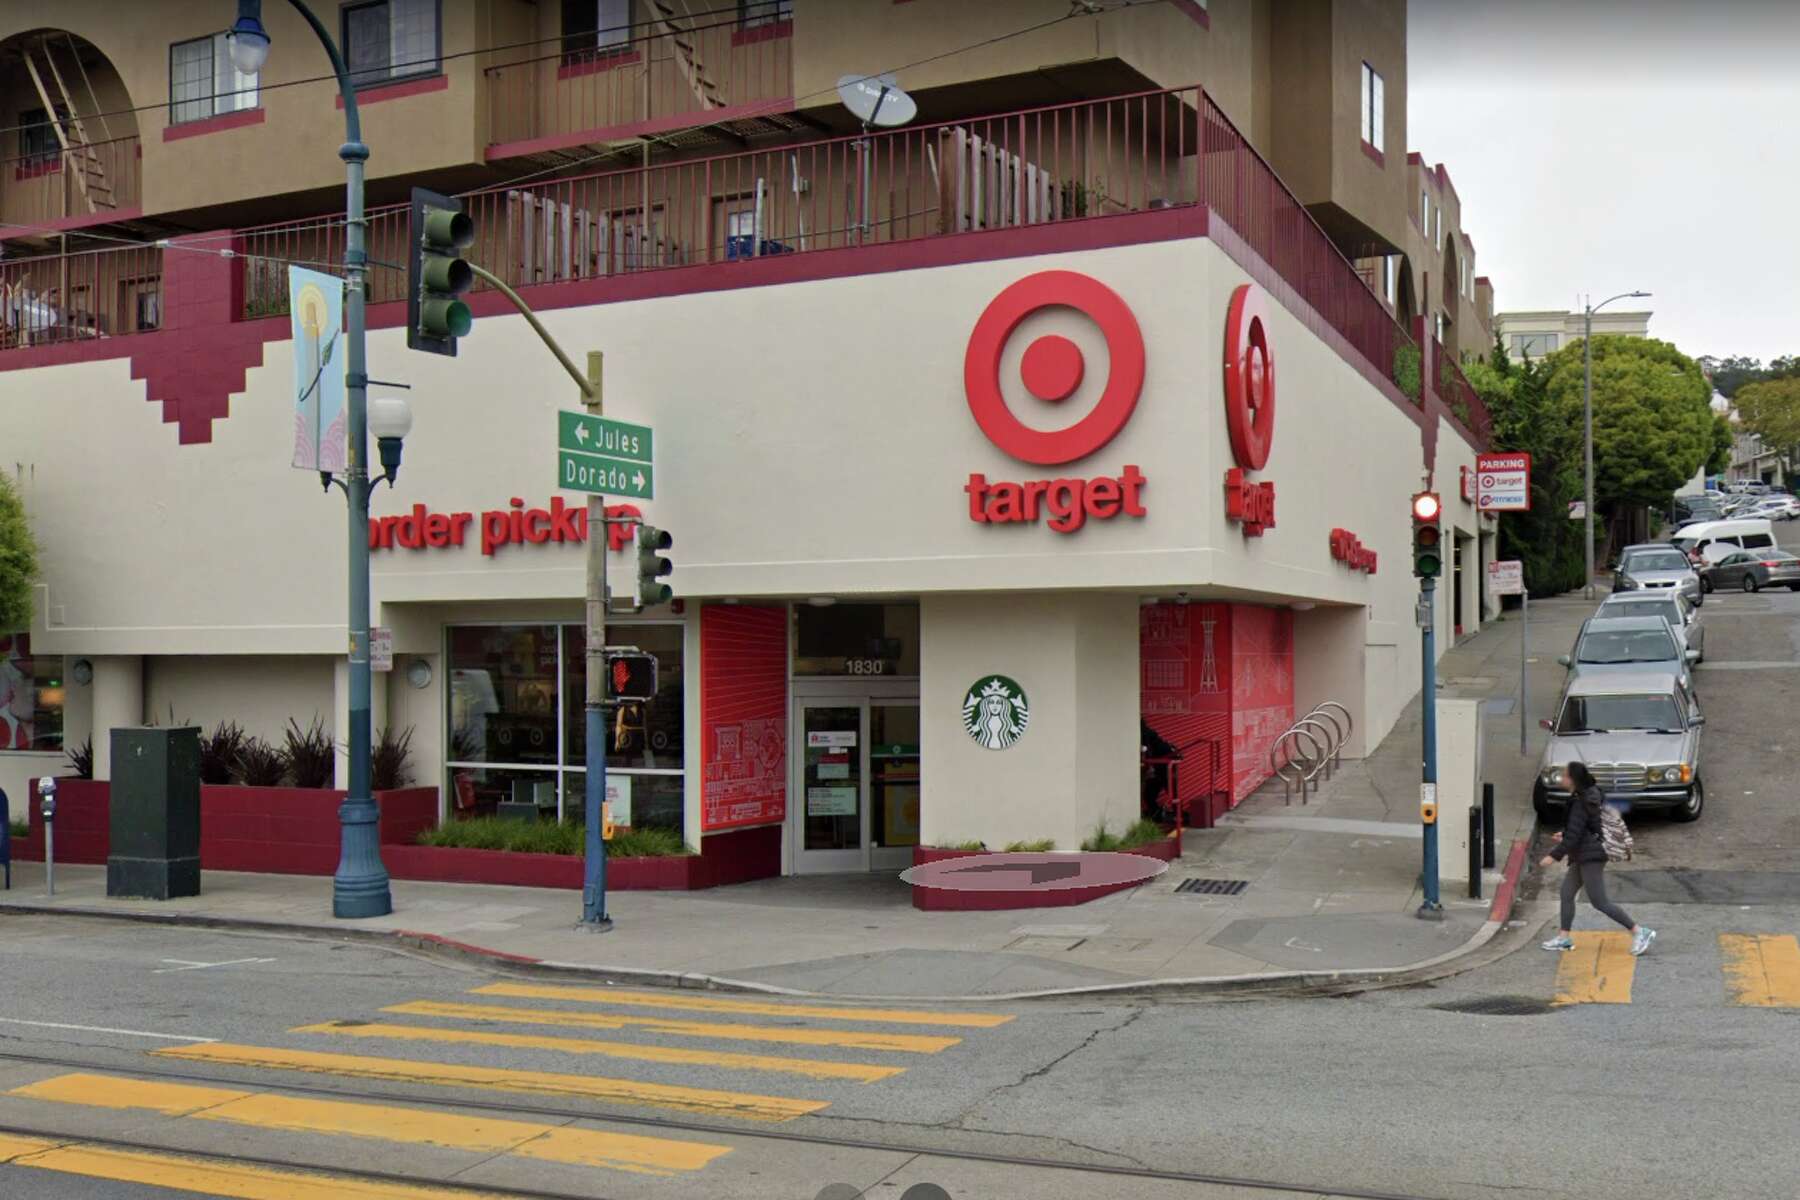 Target is closing 2 stores in Bay Area, including one in San Francisco